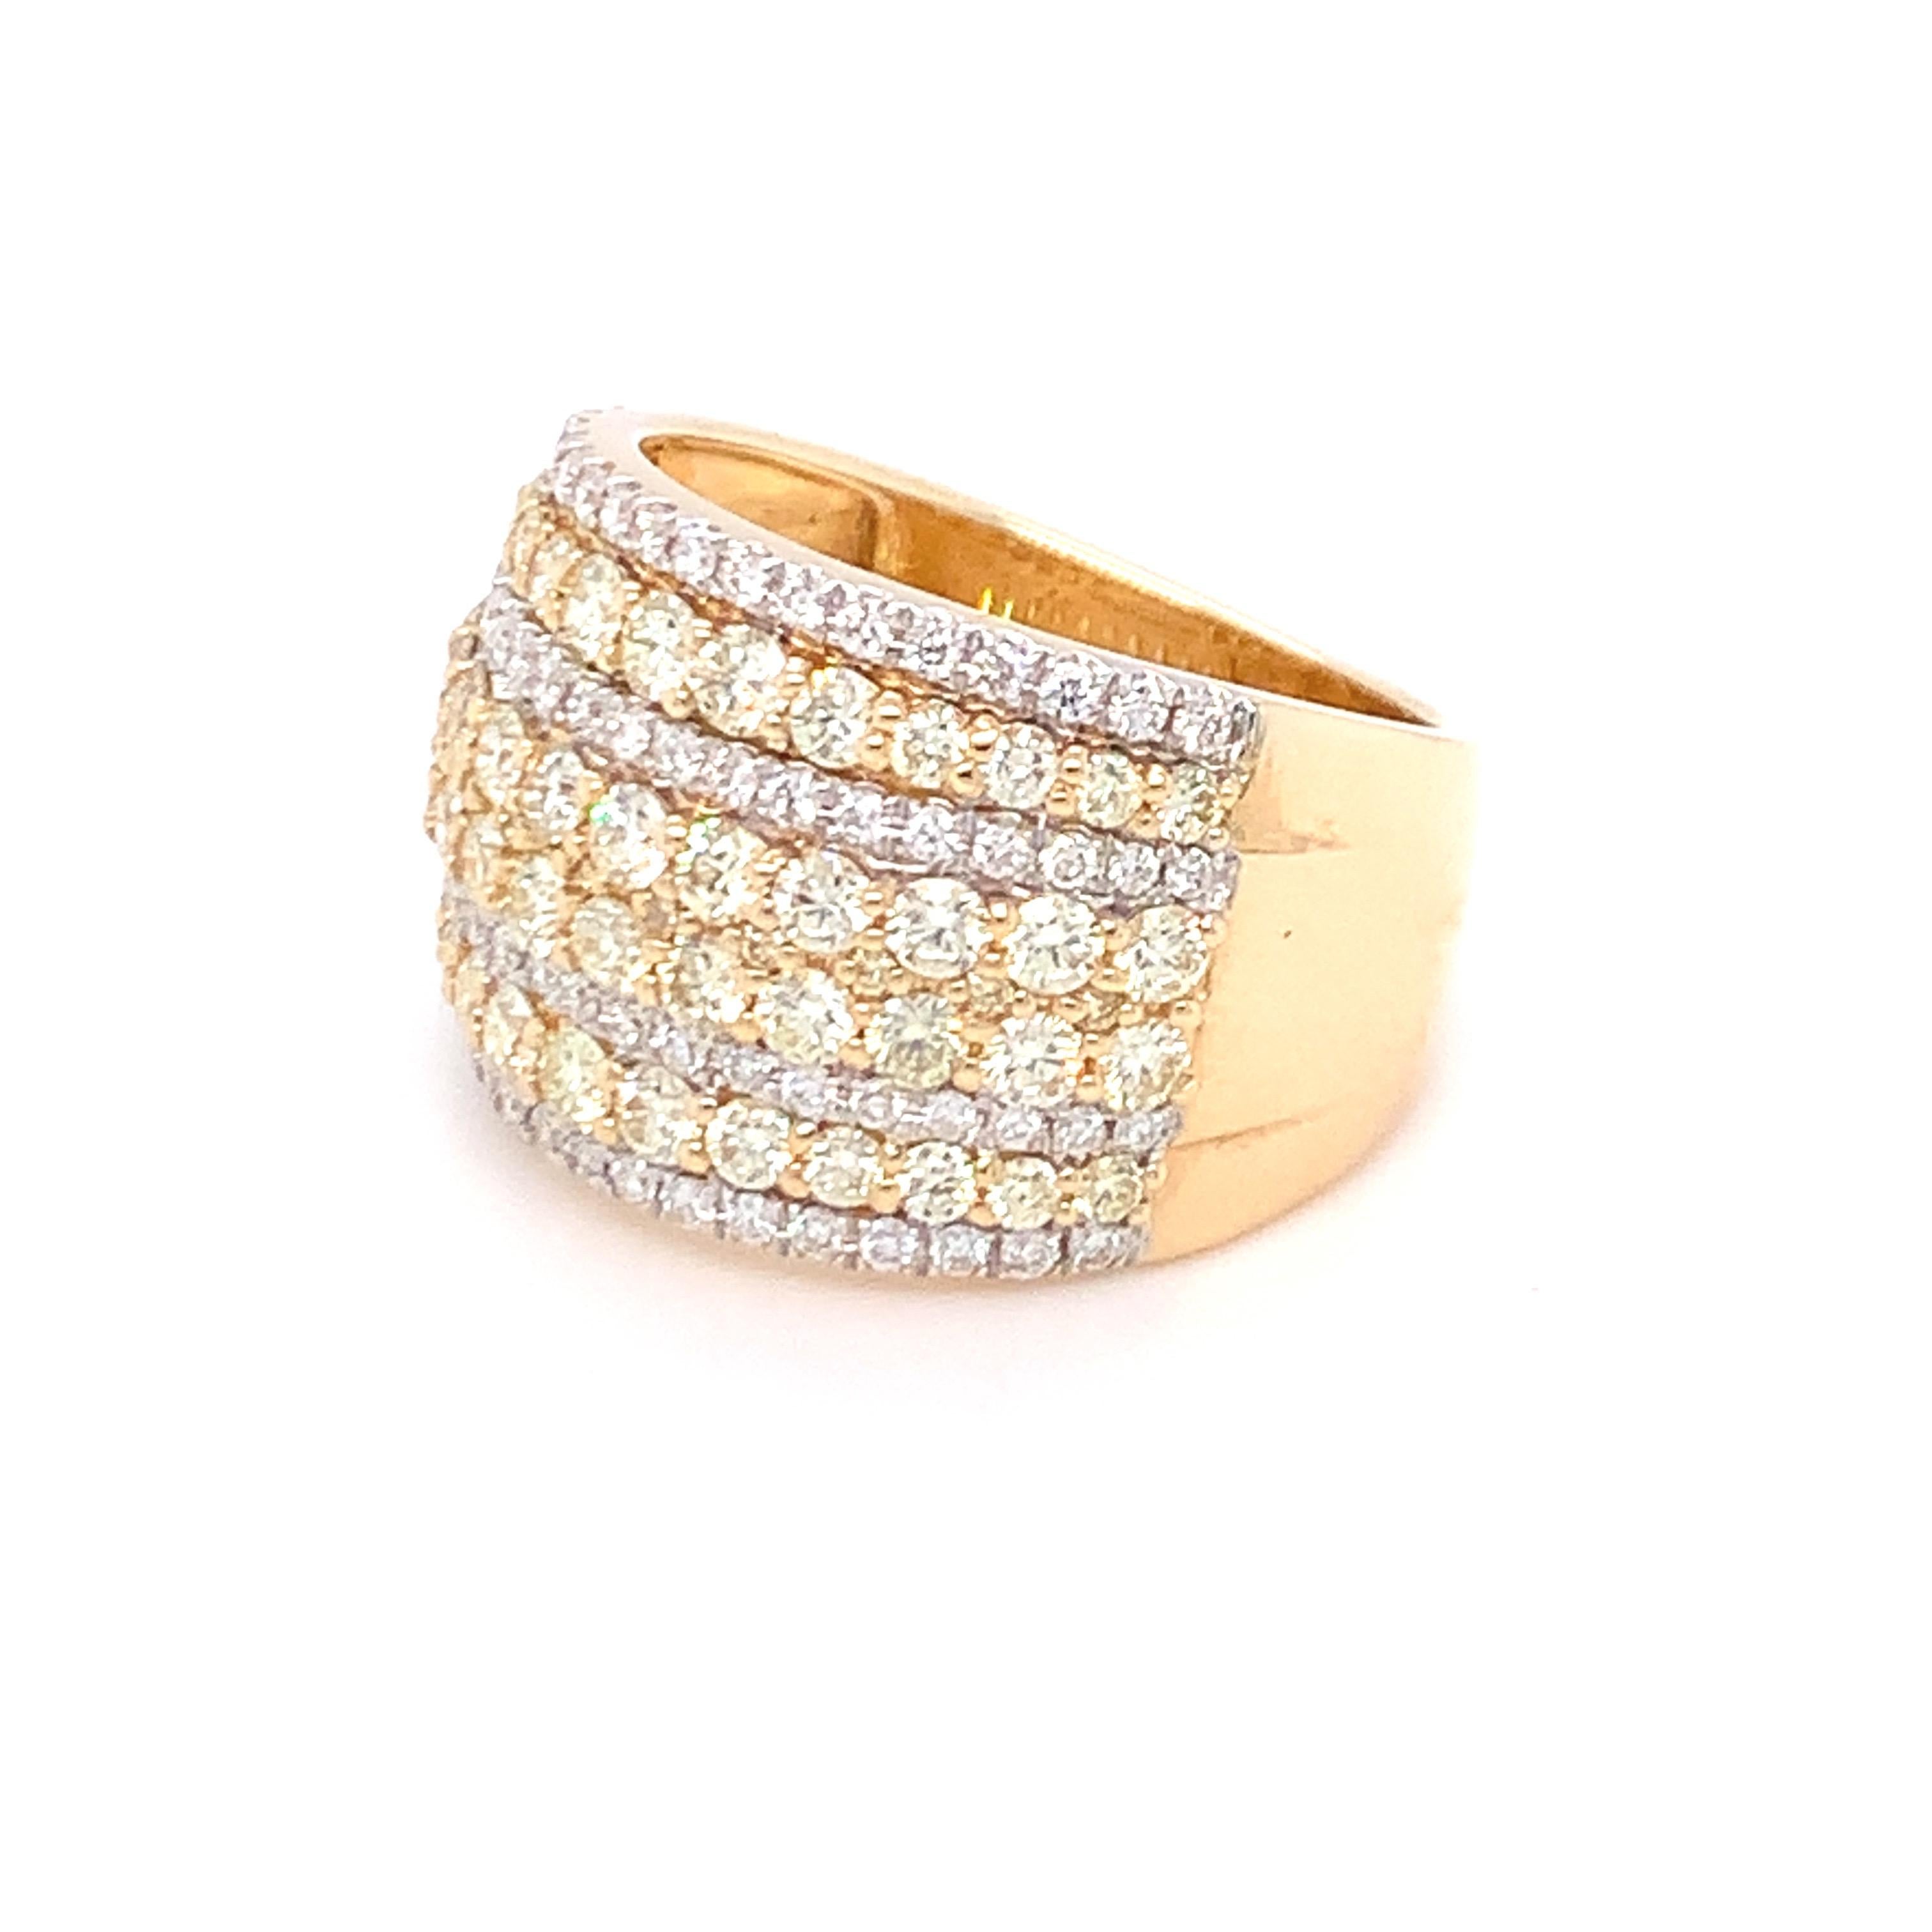 2.08 Carat Diamond Band Ring in 14k Yellow Gold For Sale 8